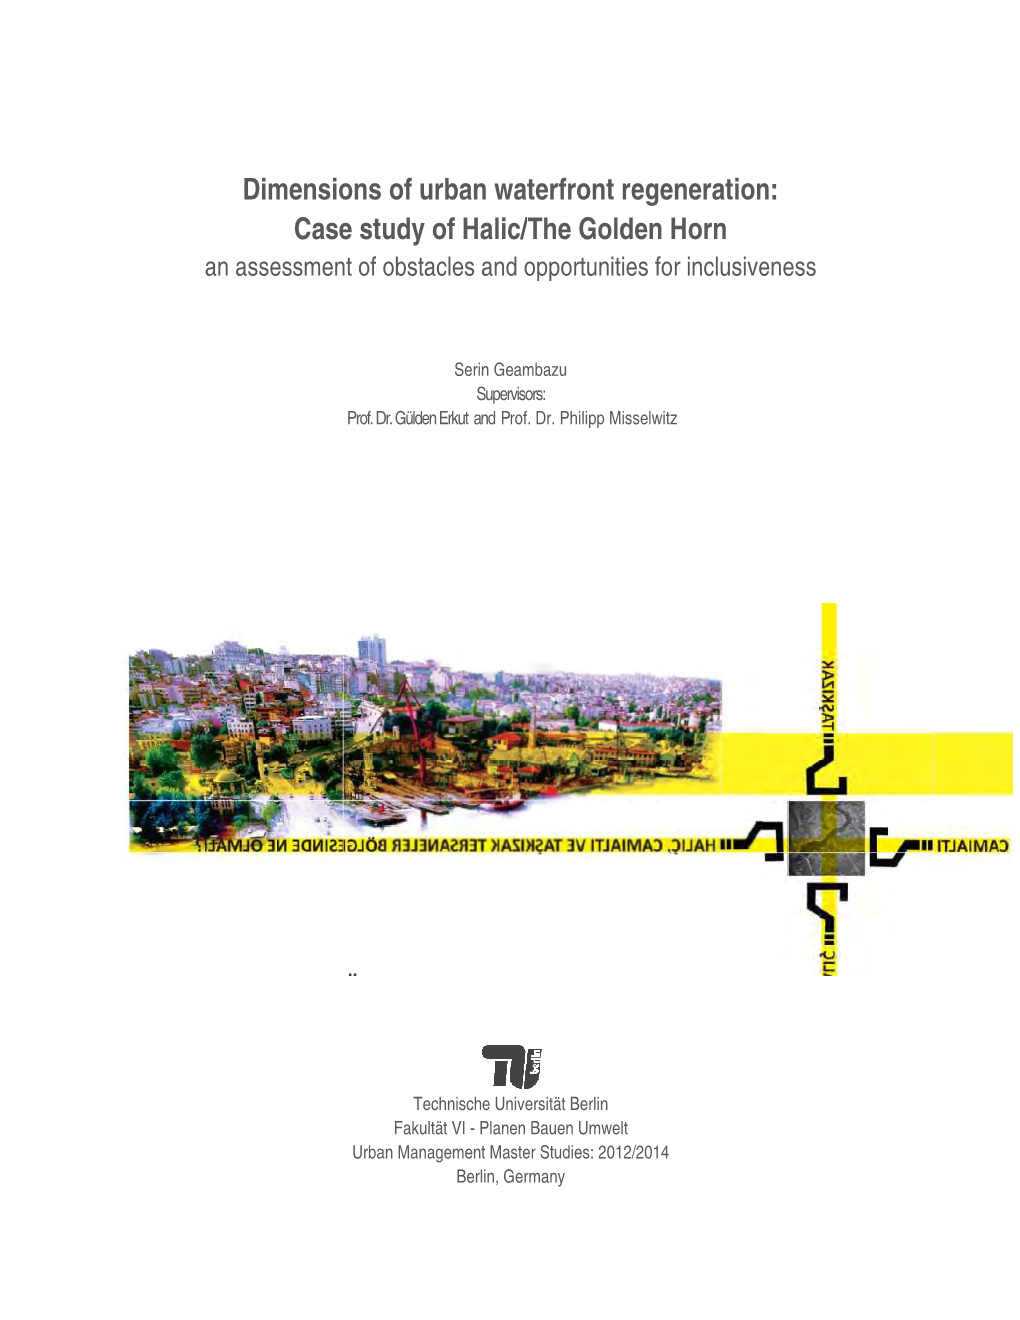 Dimensions of Urban Waterfront Regeneration: Case Study of Halic/The Golden Horn an Assessment of Obstacles and Opportunities for Inclusiveness